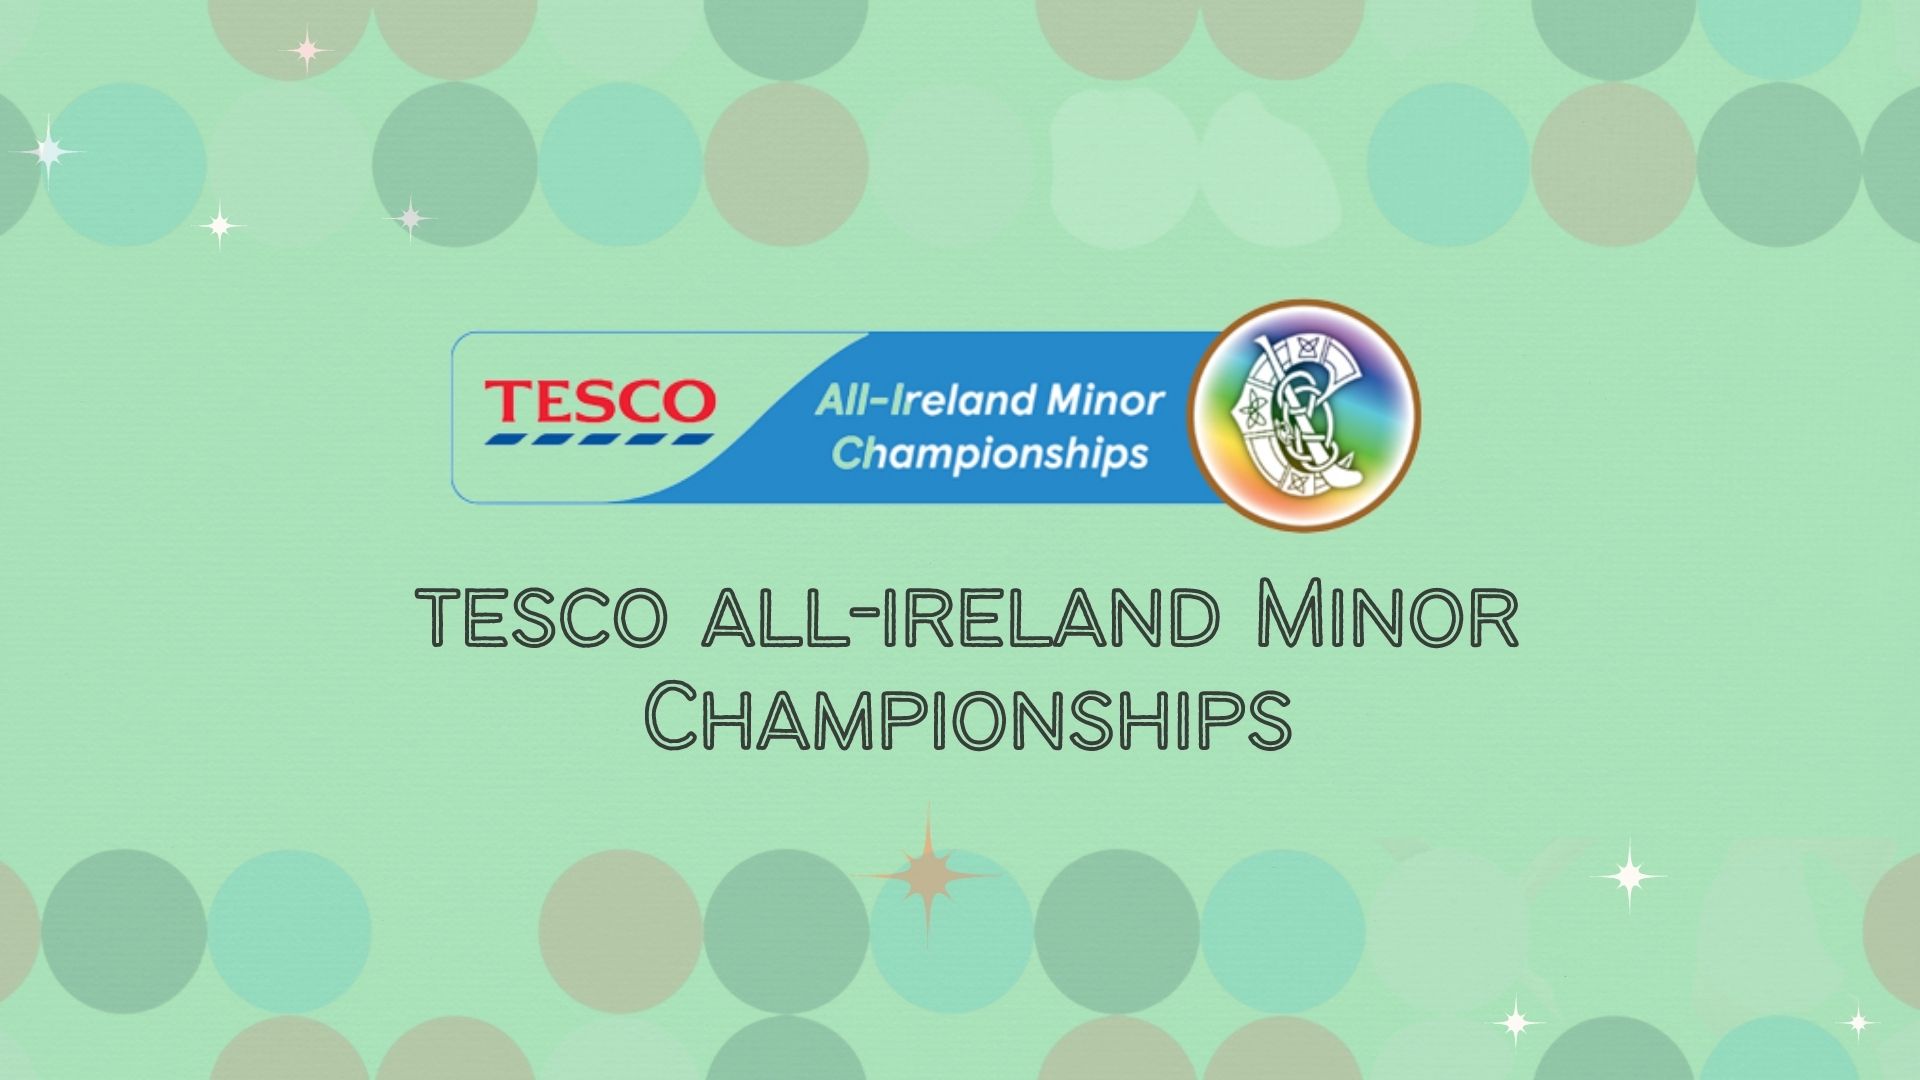 RESULTS: Tesco All-Ireland Minor Championships, March 13th